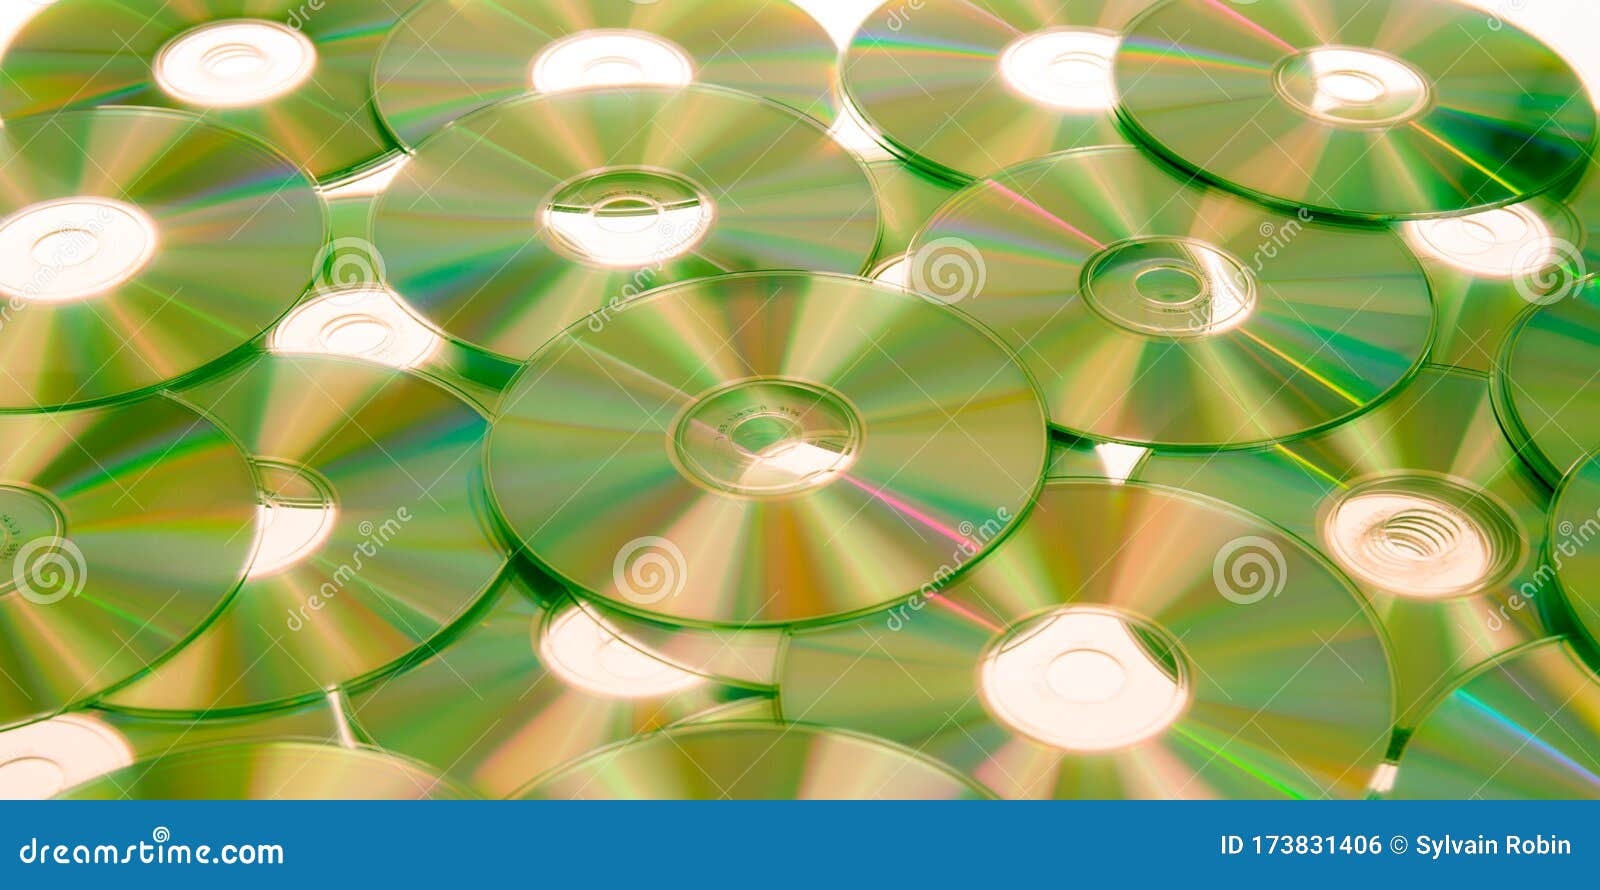 Rainbow Yellow Cd Collection Dvd Bluray on Background Top View Wallpaper  Stock Photo - Image of colorful, pattern: 173831406